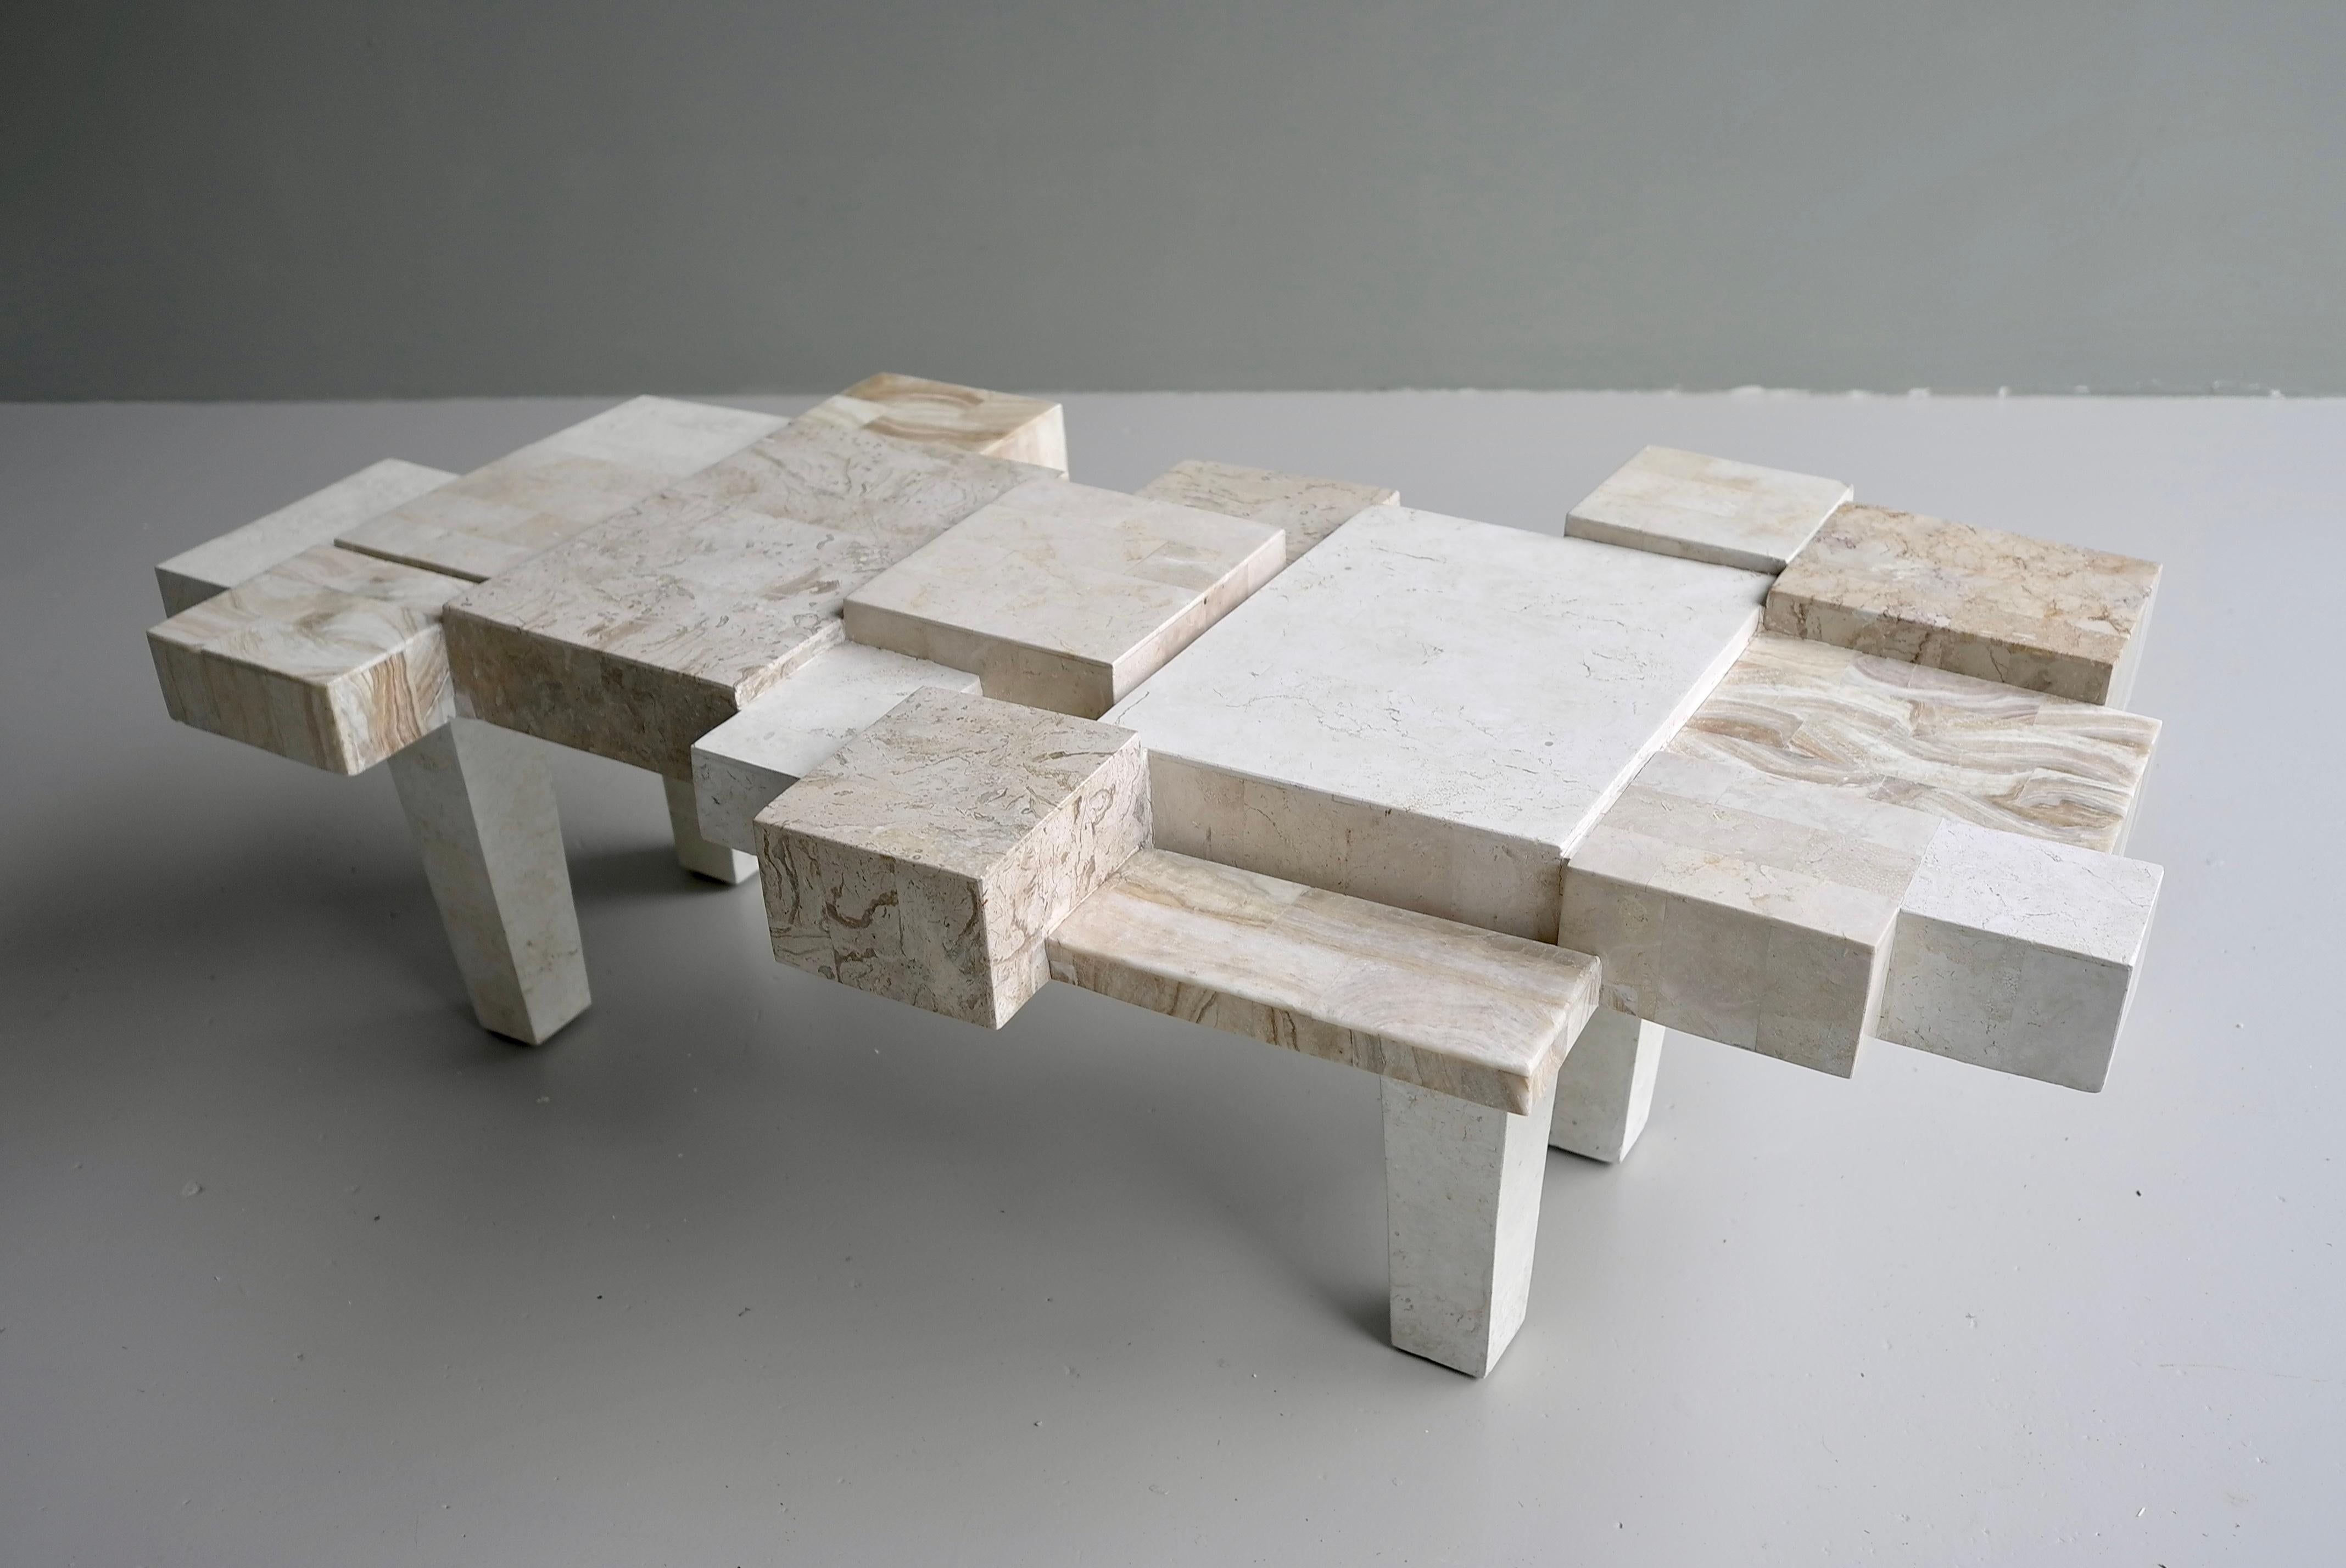 Architectural Travertine and white stone Art coffee table, Belgium 1970's

The different levels and asymmetry makes this table a lively composition. Made from various types of Travertine and stone. 

